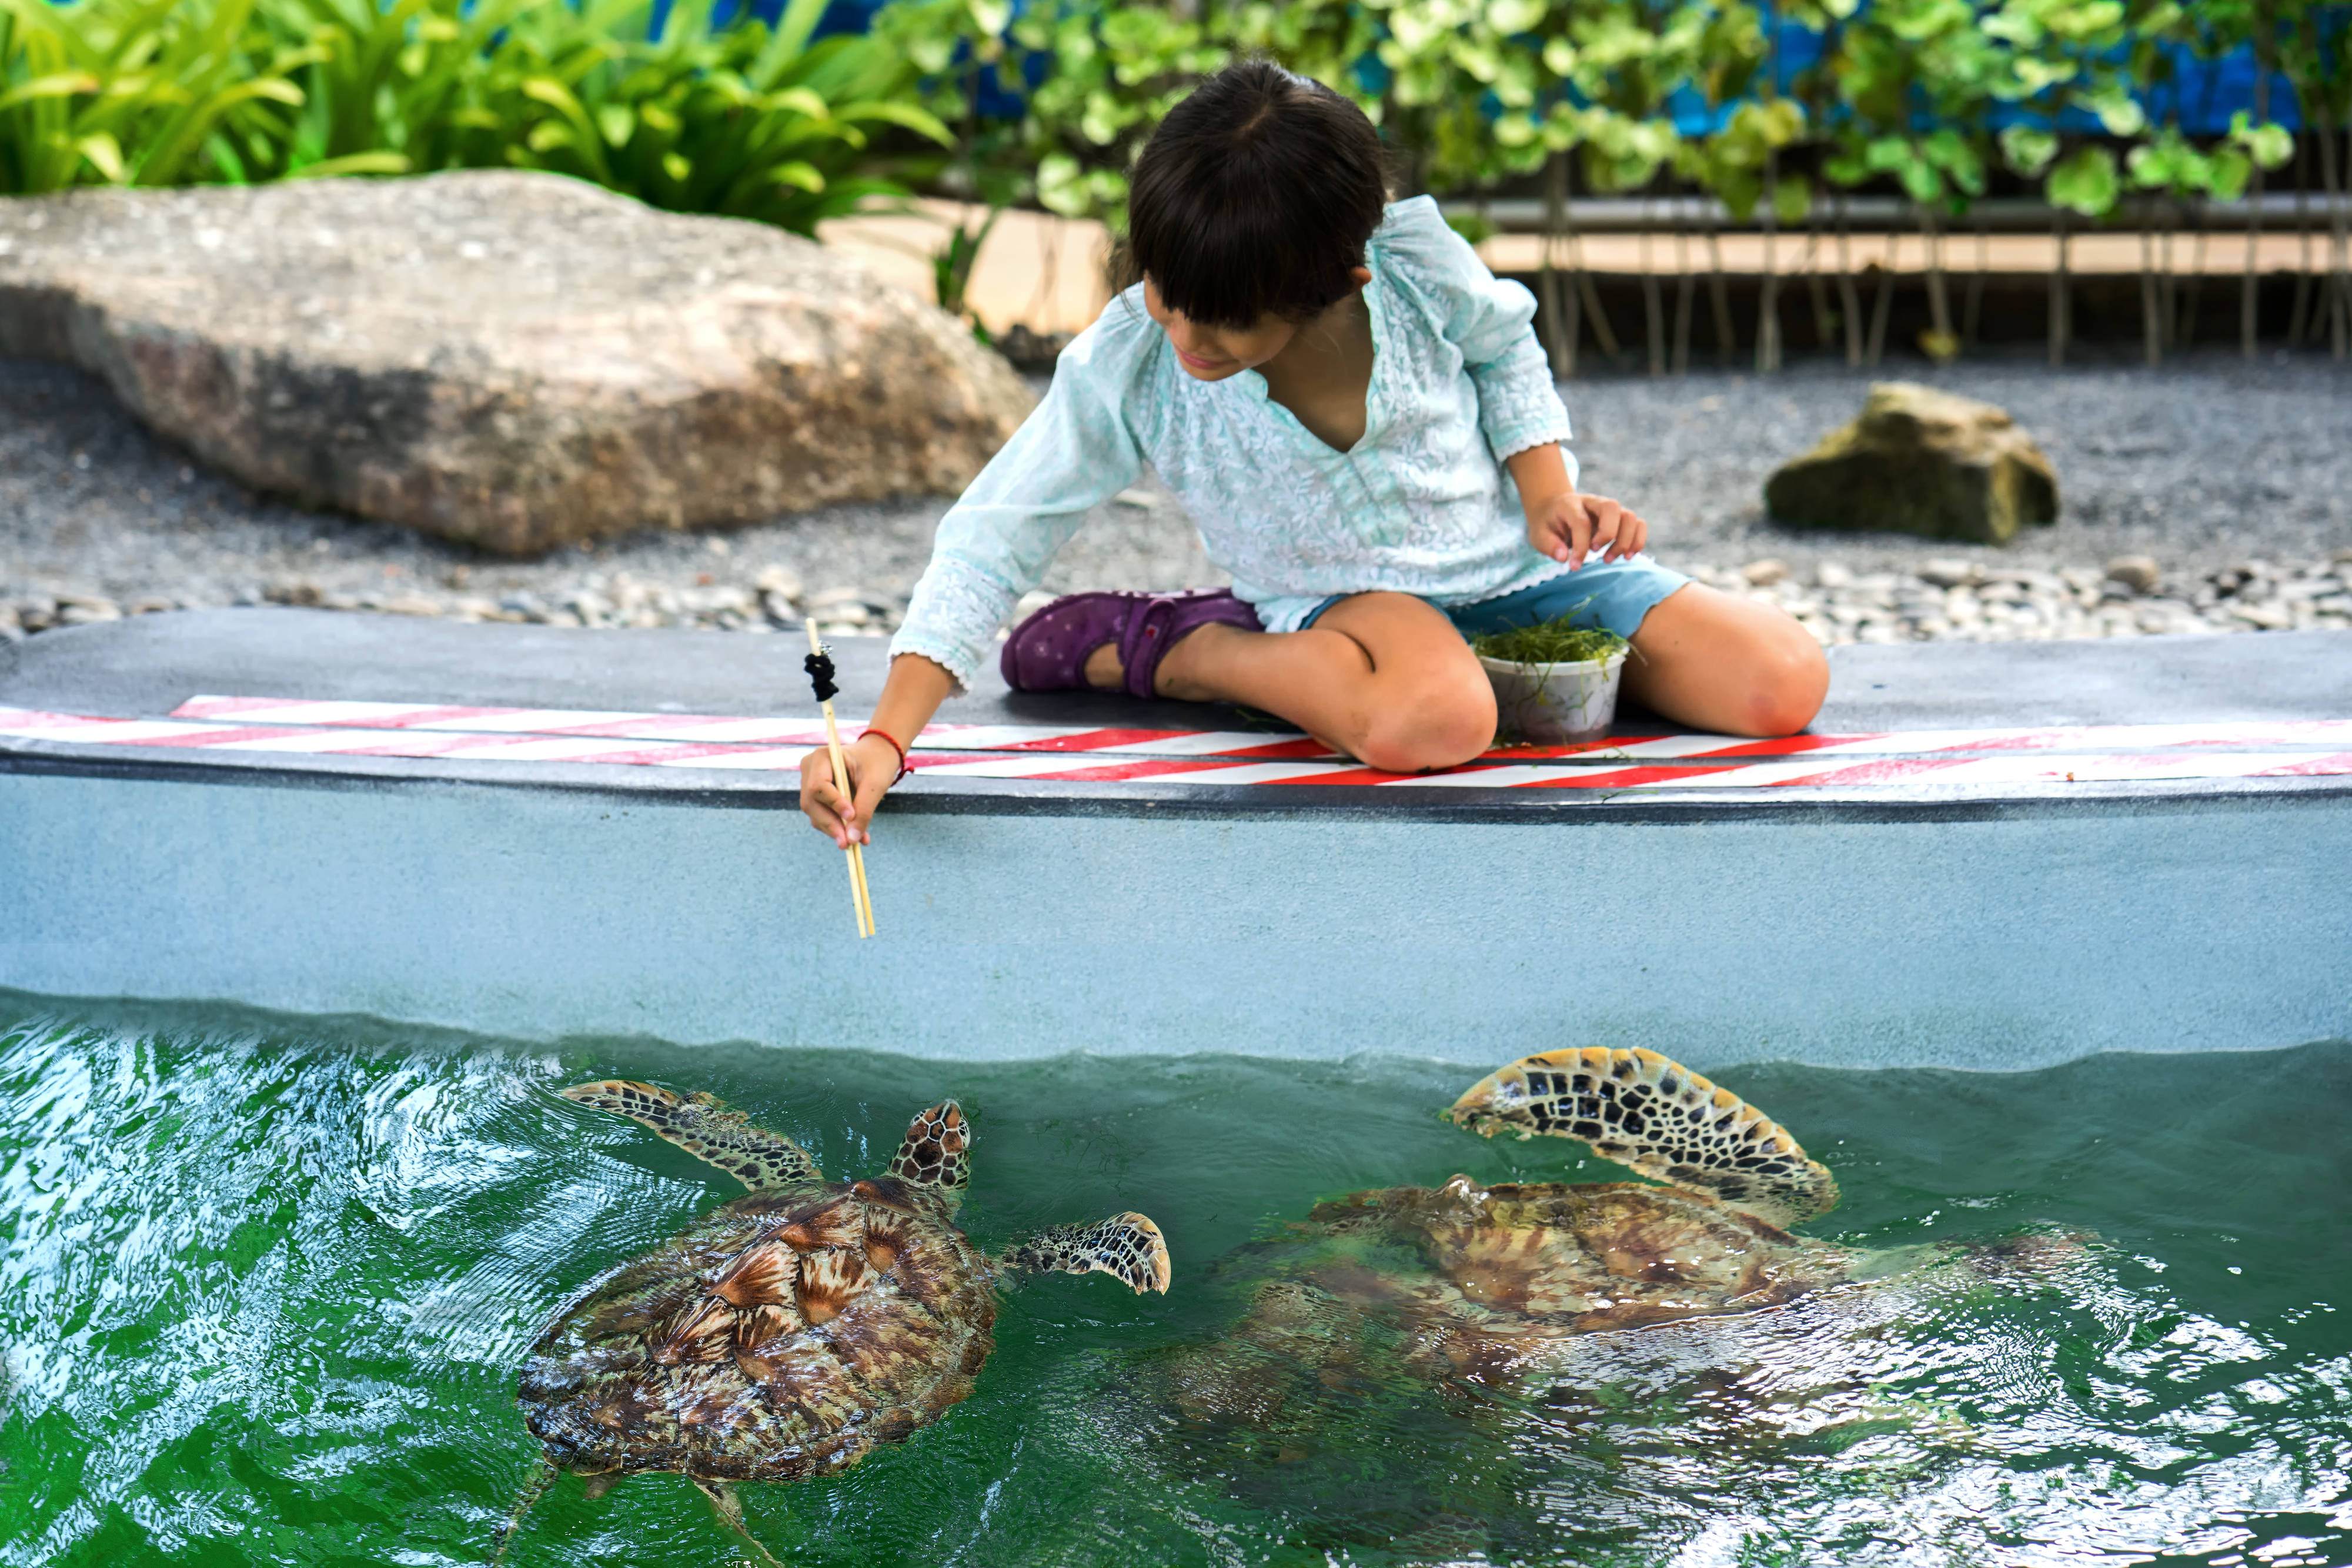 Learn How to Care for Injured Turtles